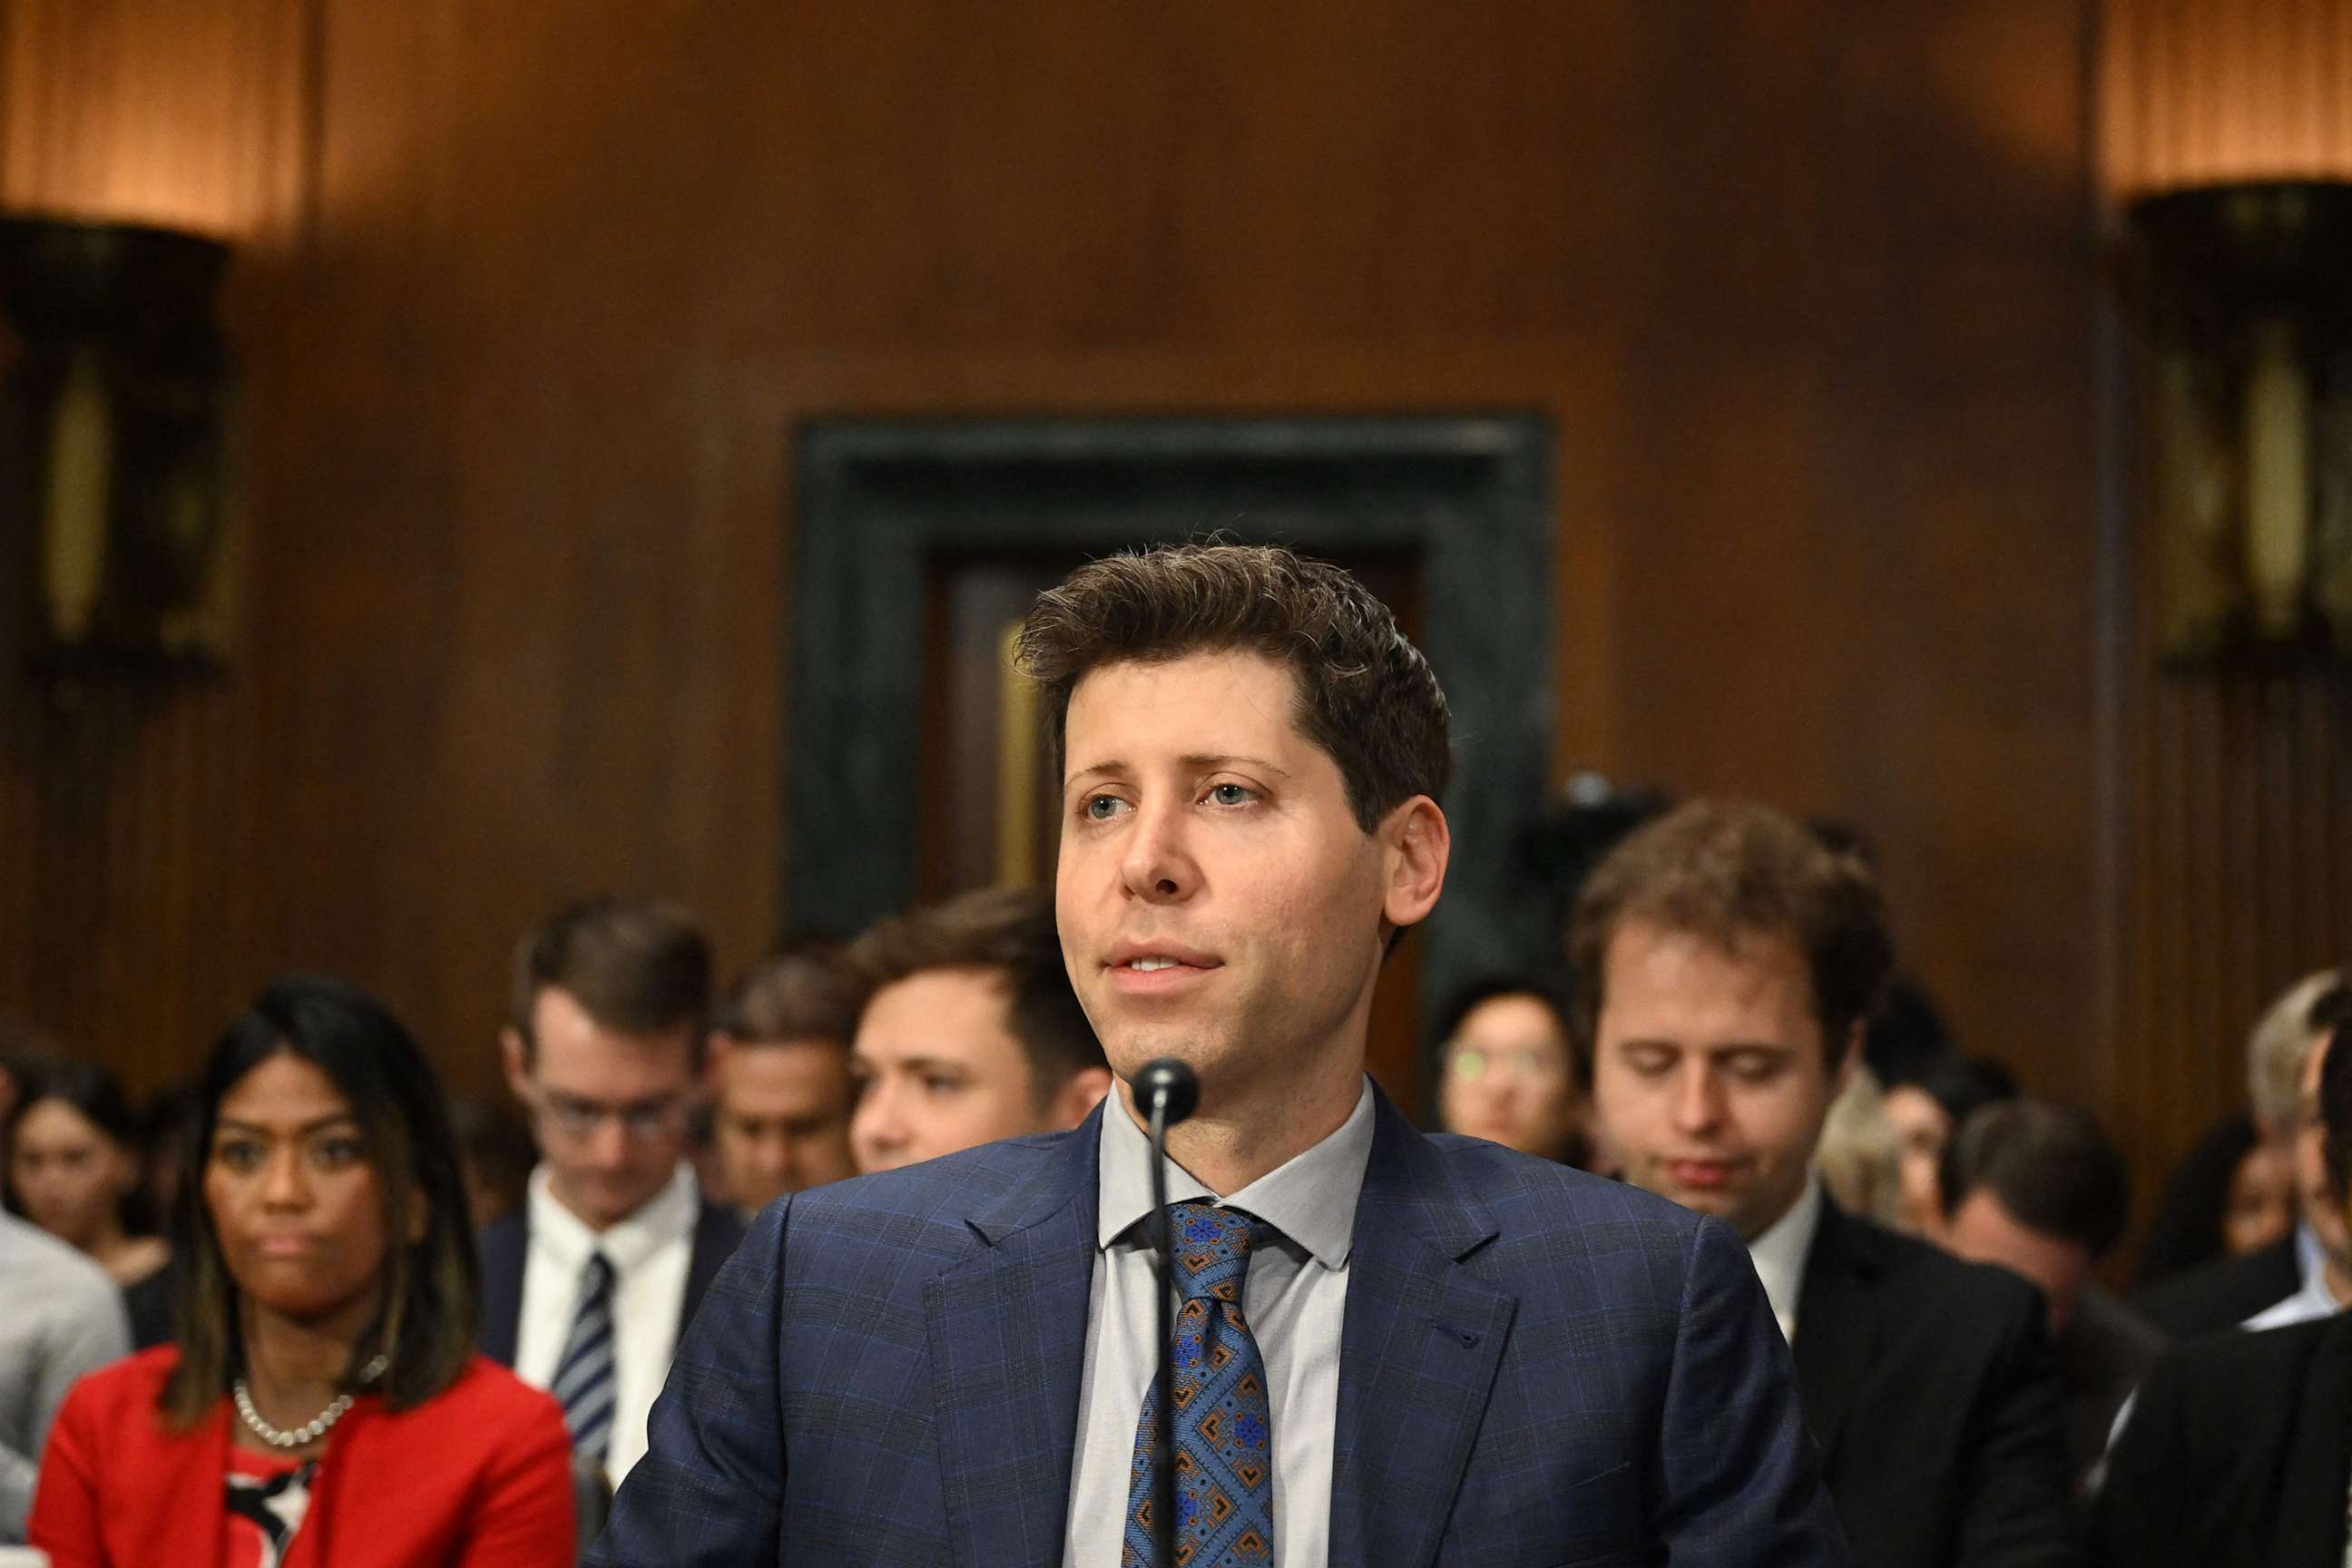 PHOTO: Samuel Altman, CEO of OpenAI during a Senate Judiciary Subcommittee on Privacy, Technology, and the Law oversight hearing to examine artificial intelligence, on Capitol Hill in Washington, D.C., on May 16, 2023.